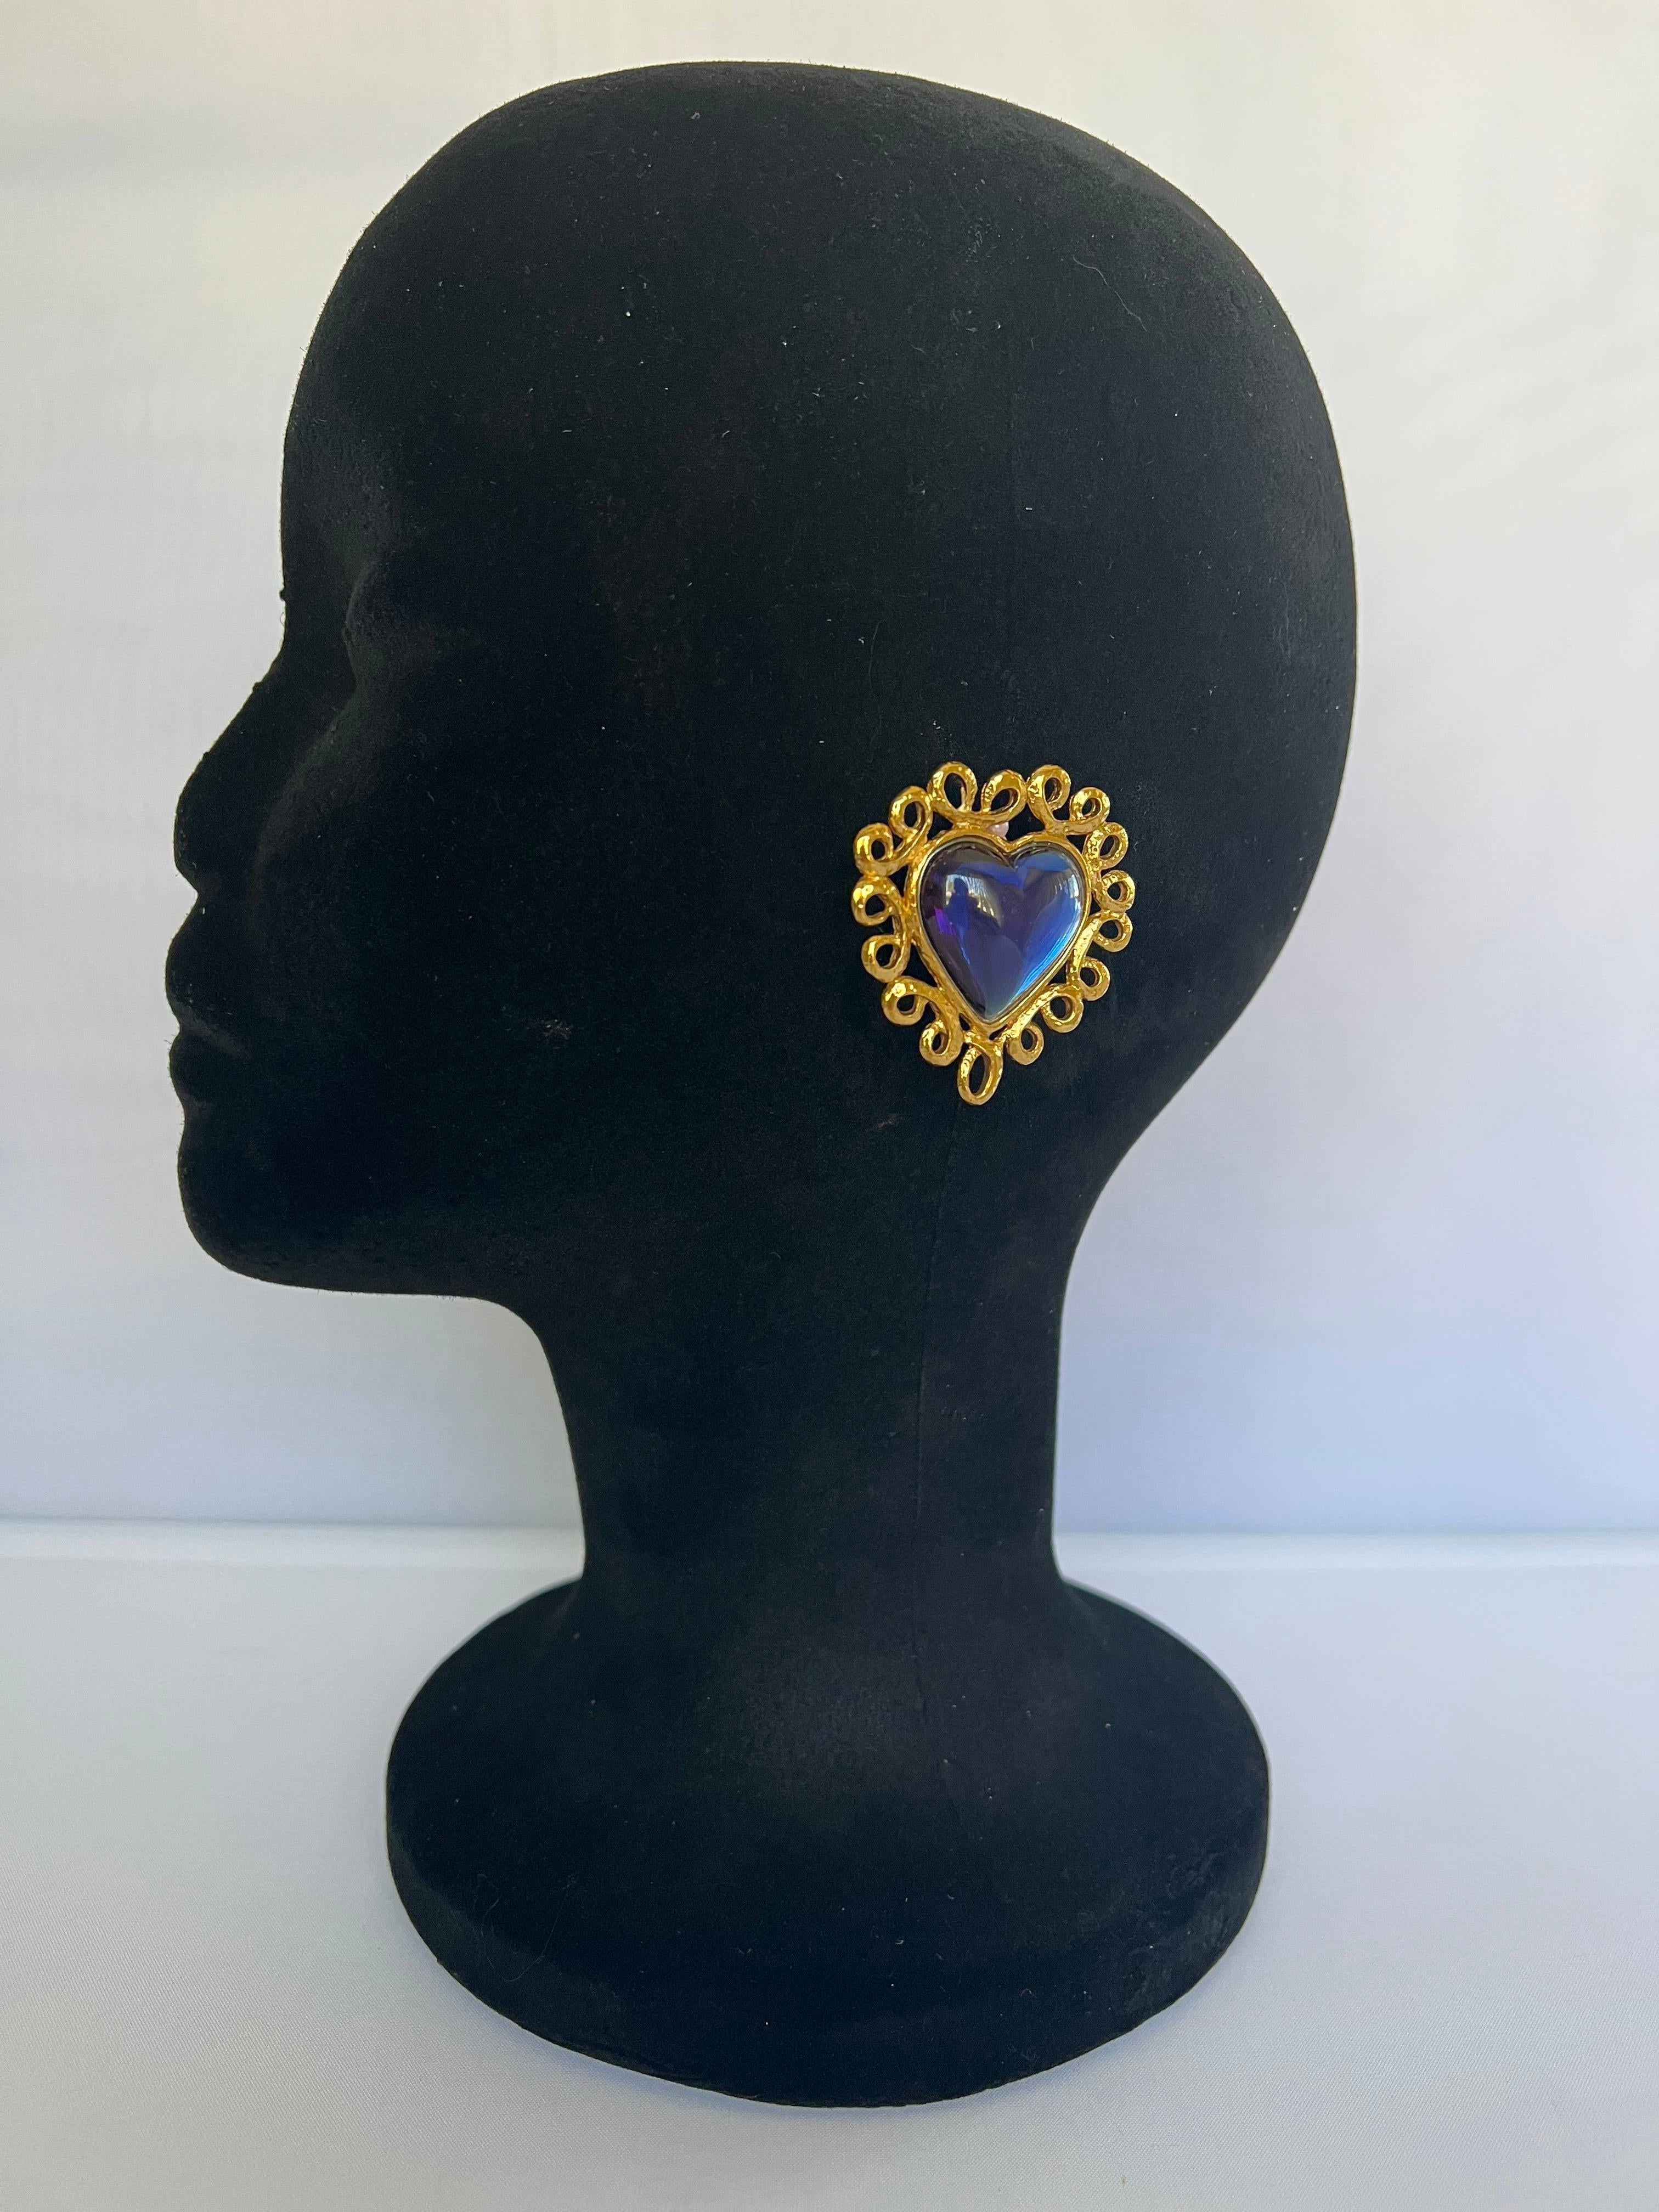 Magnificent vintage Yves Saint Laurent (YSL) gilt metal(metal dore)  blue acrylic heart clip-on earrings. Signed YSL on the back of the clip.